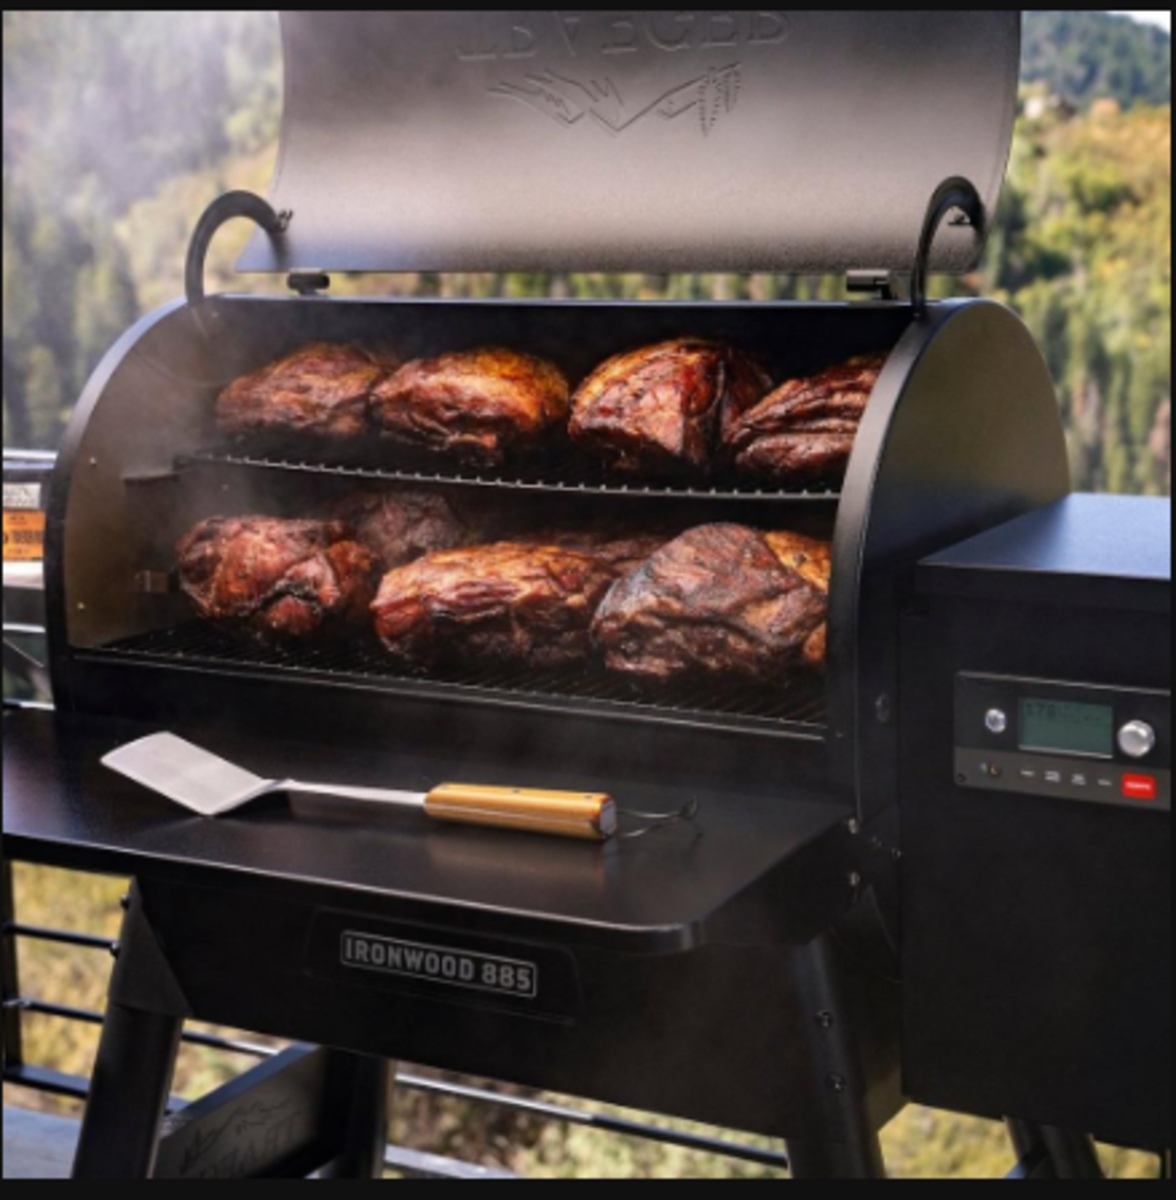 Highest Rated Pellet Grills: Our Comprehensive Guide to Finding the Best Ones